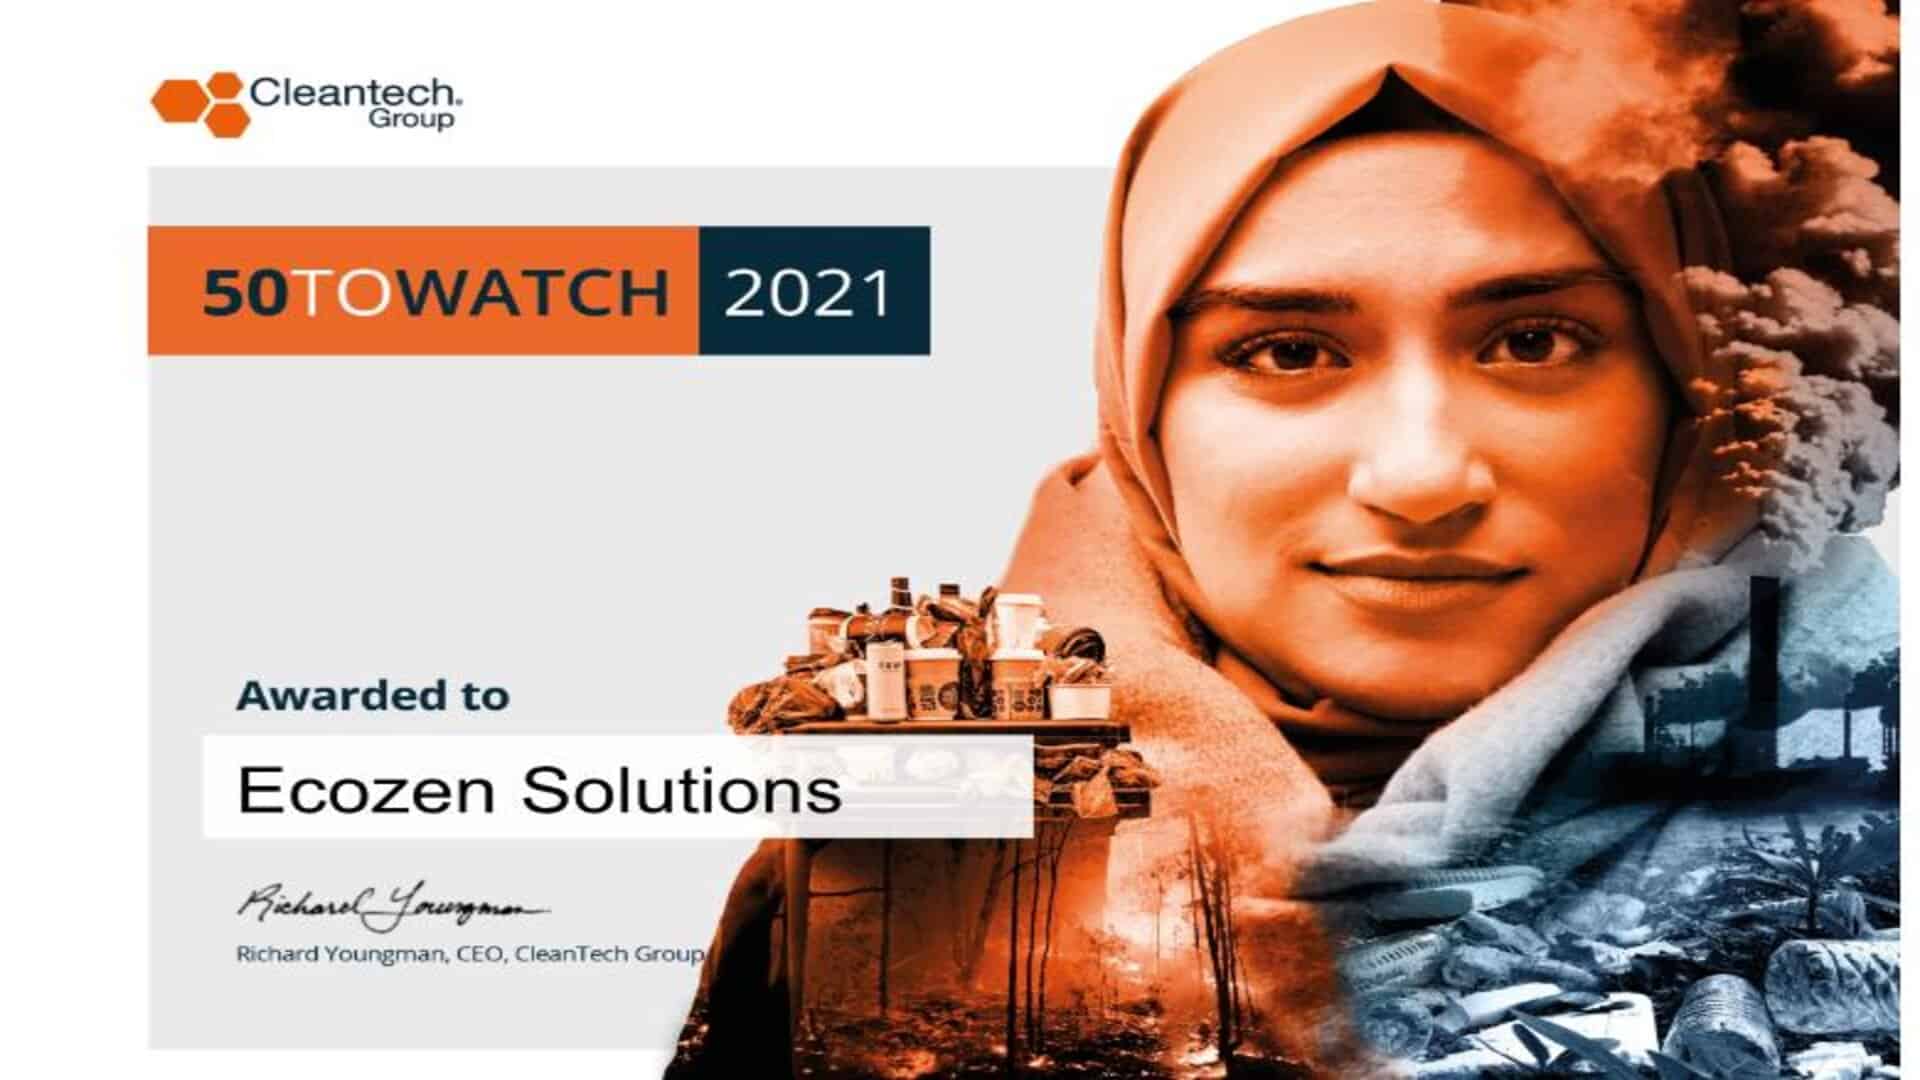 Ecozen makes it to Cleantech Group 50 Watch List